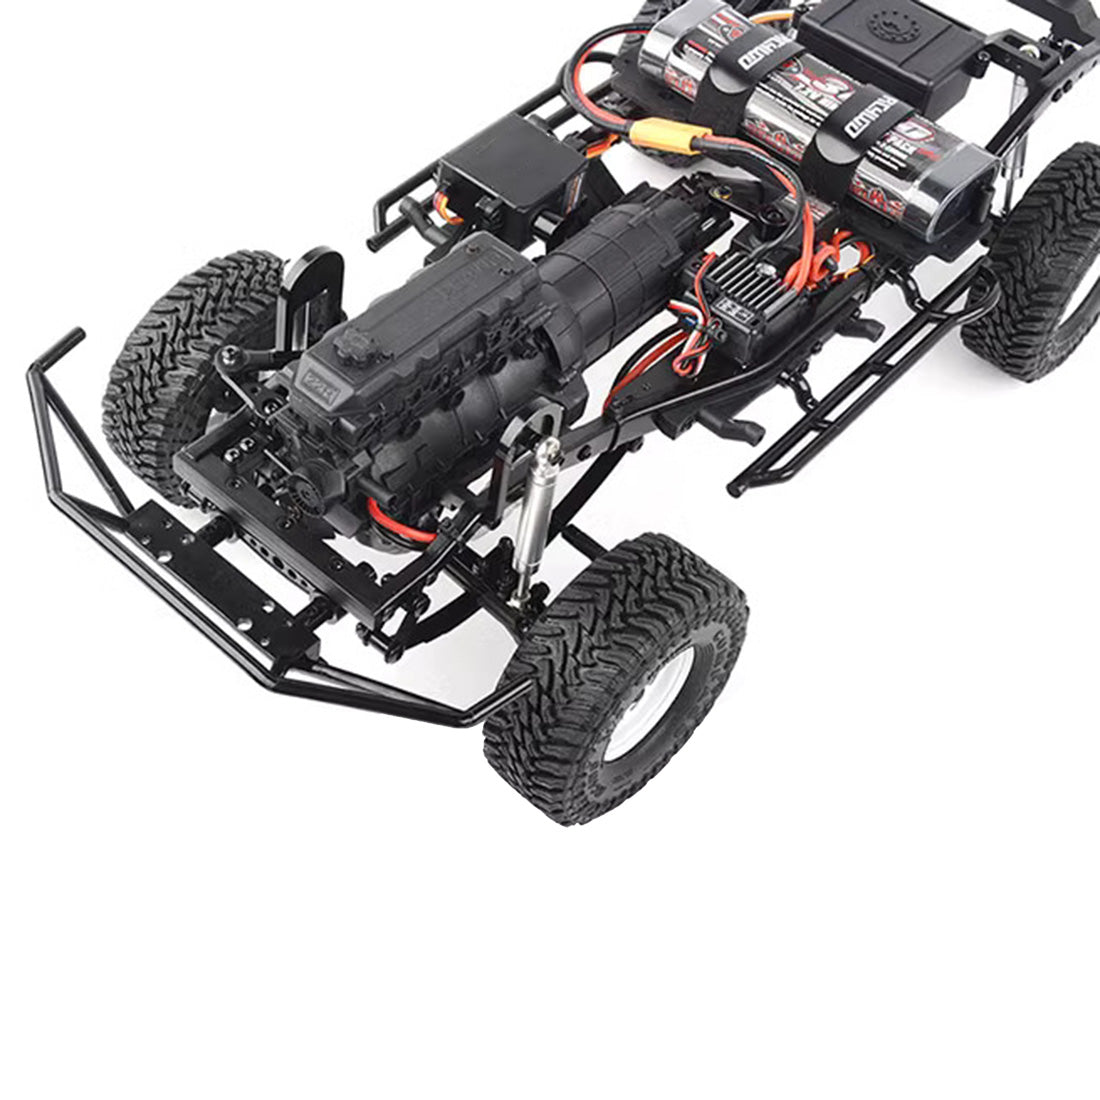 Engine Model for 1/10 RC TF3 4WD Climbing Car Collectible Ornament Vehicle Toy Modification enginediyshop